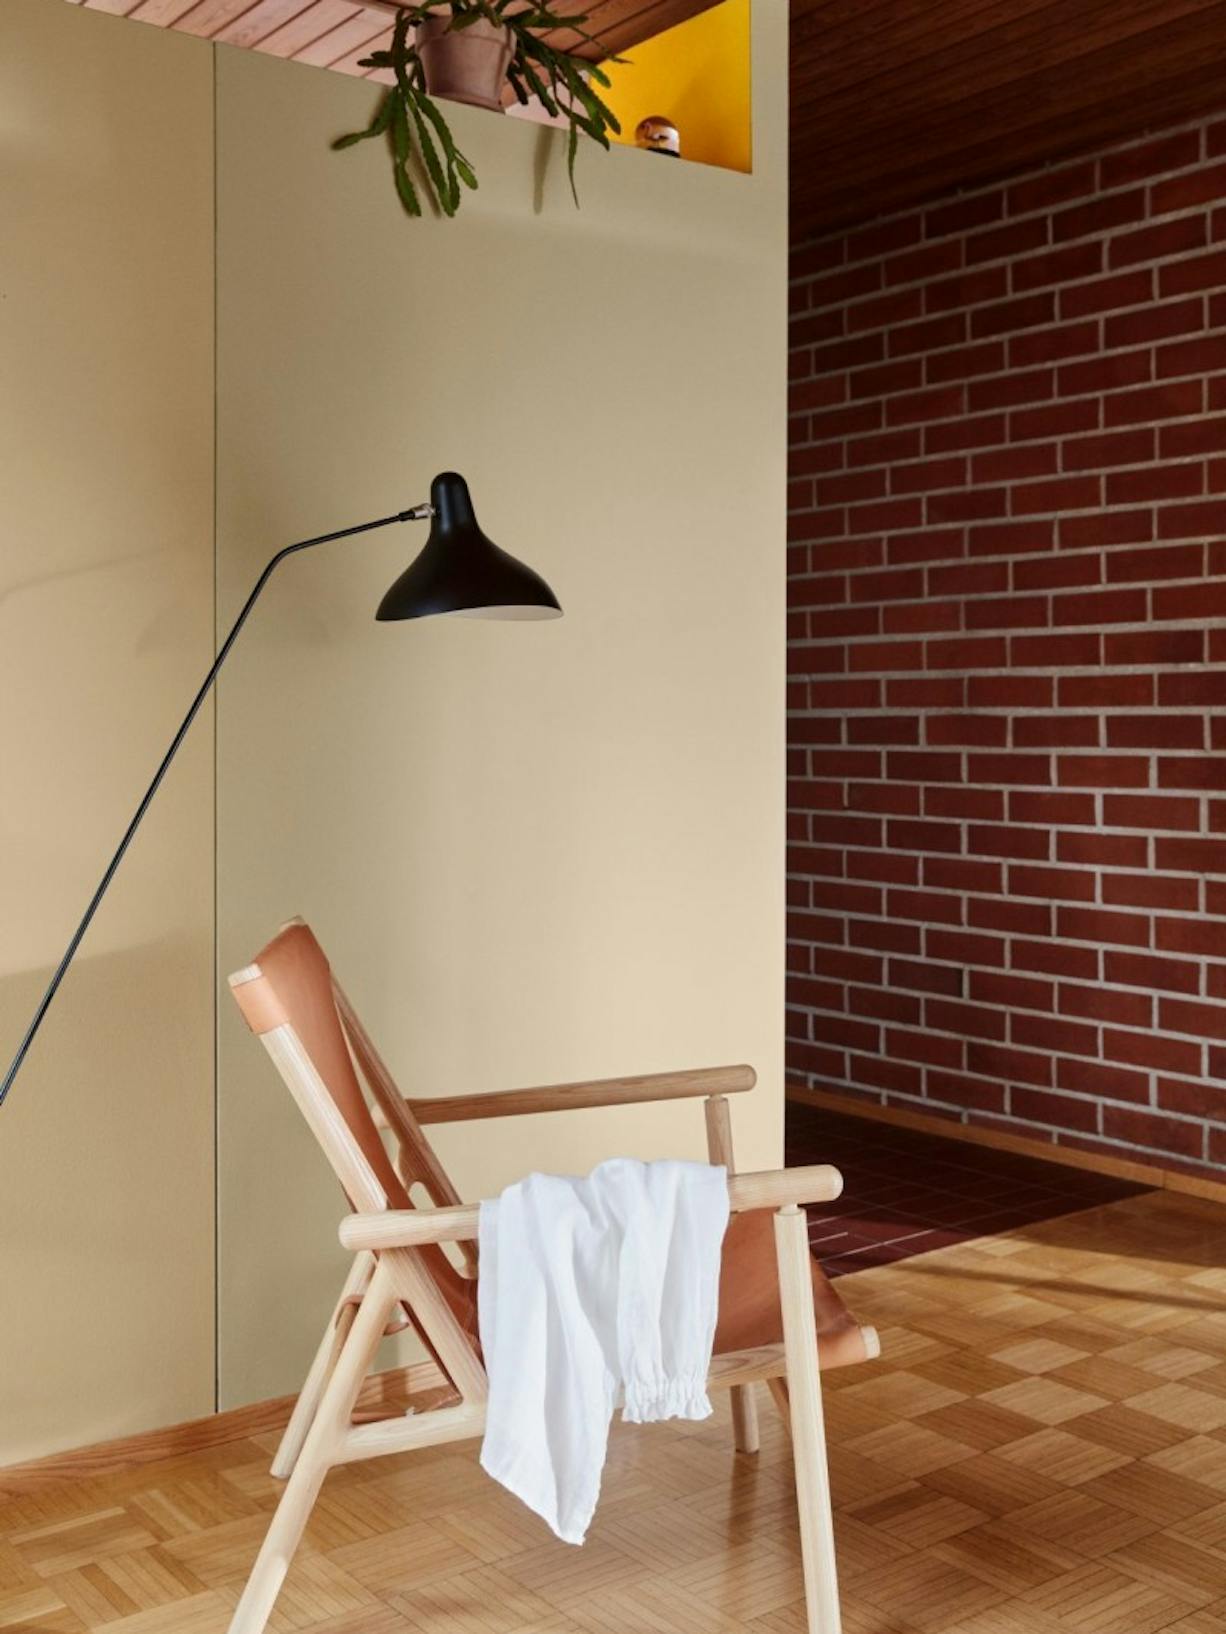 Wooden Chair and Black Lamp in a Yellow Room with Red Brick Wall 